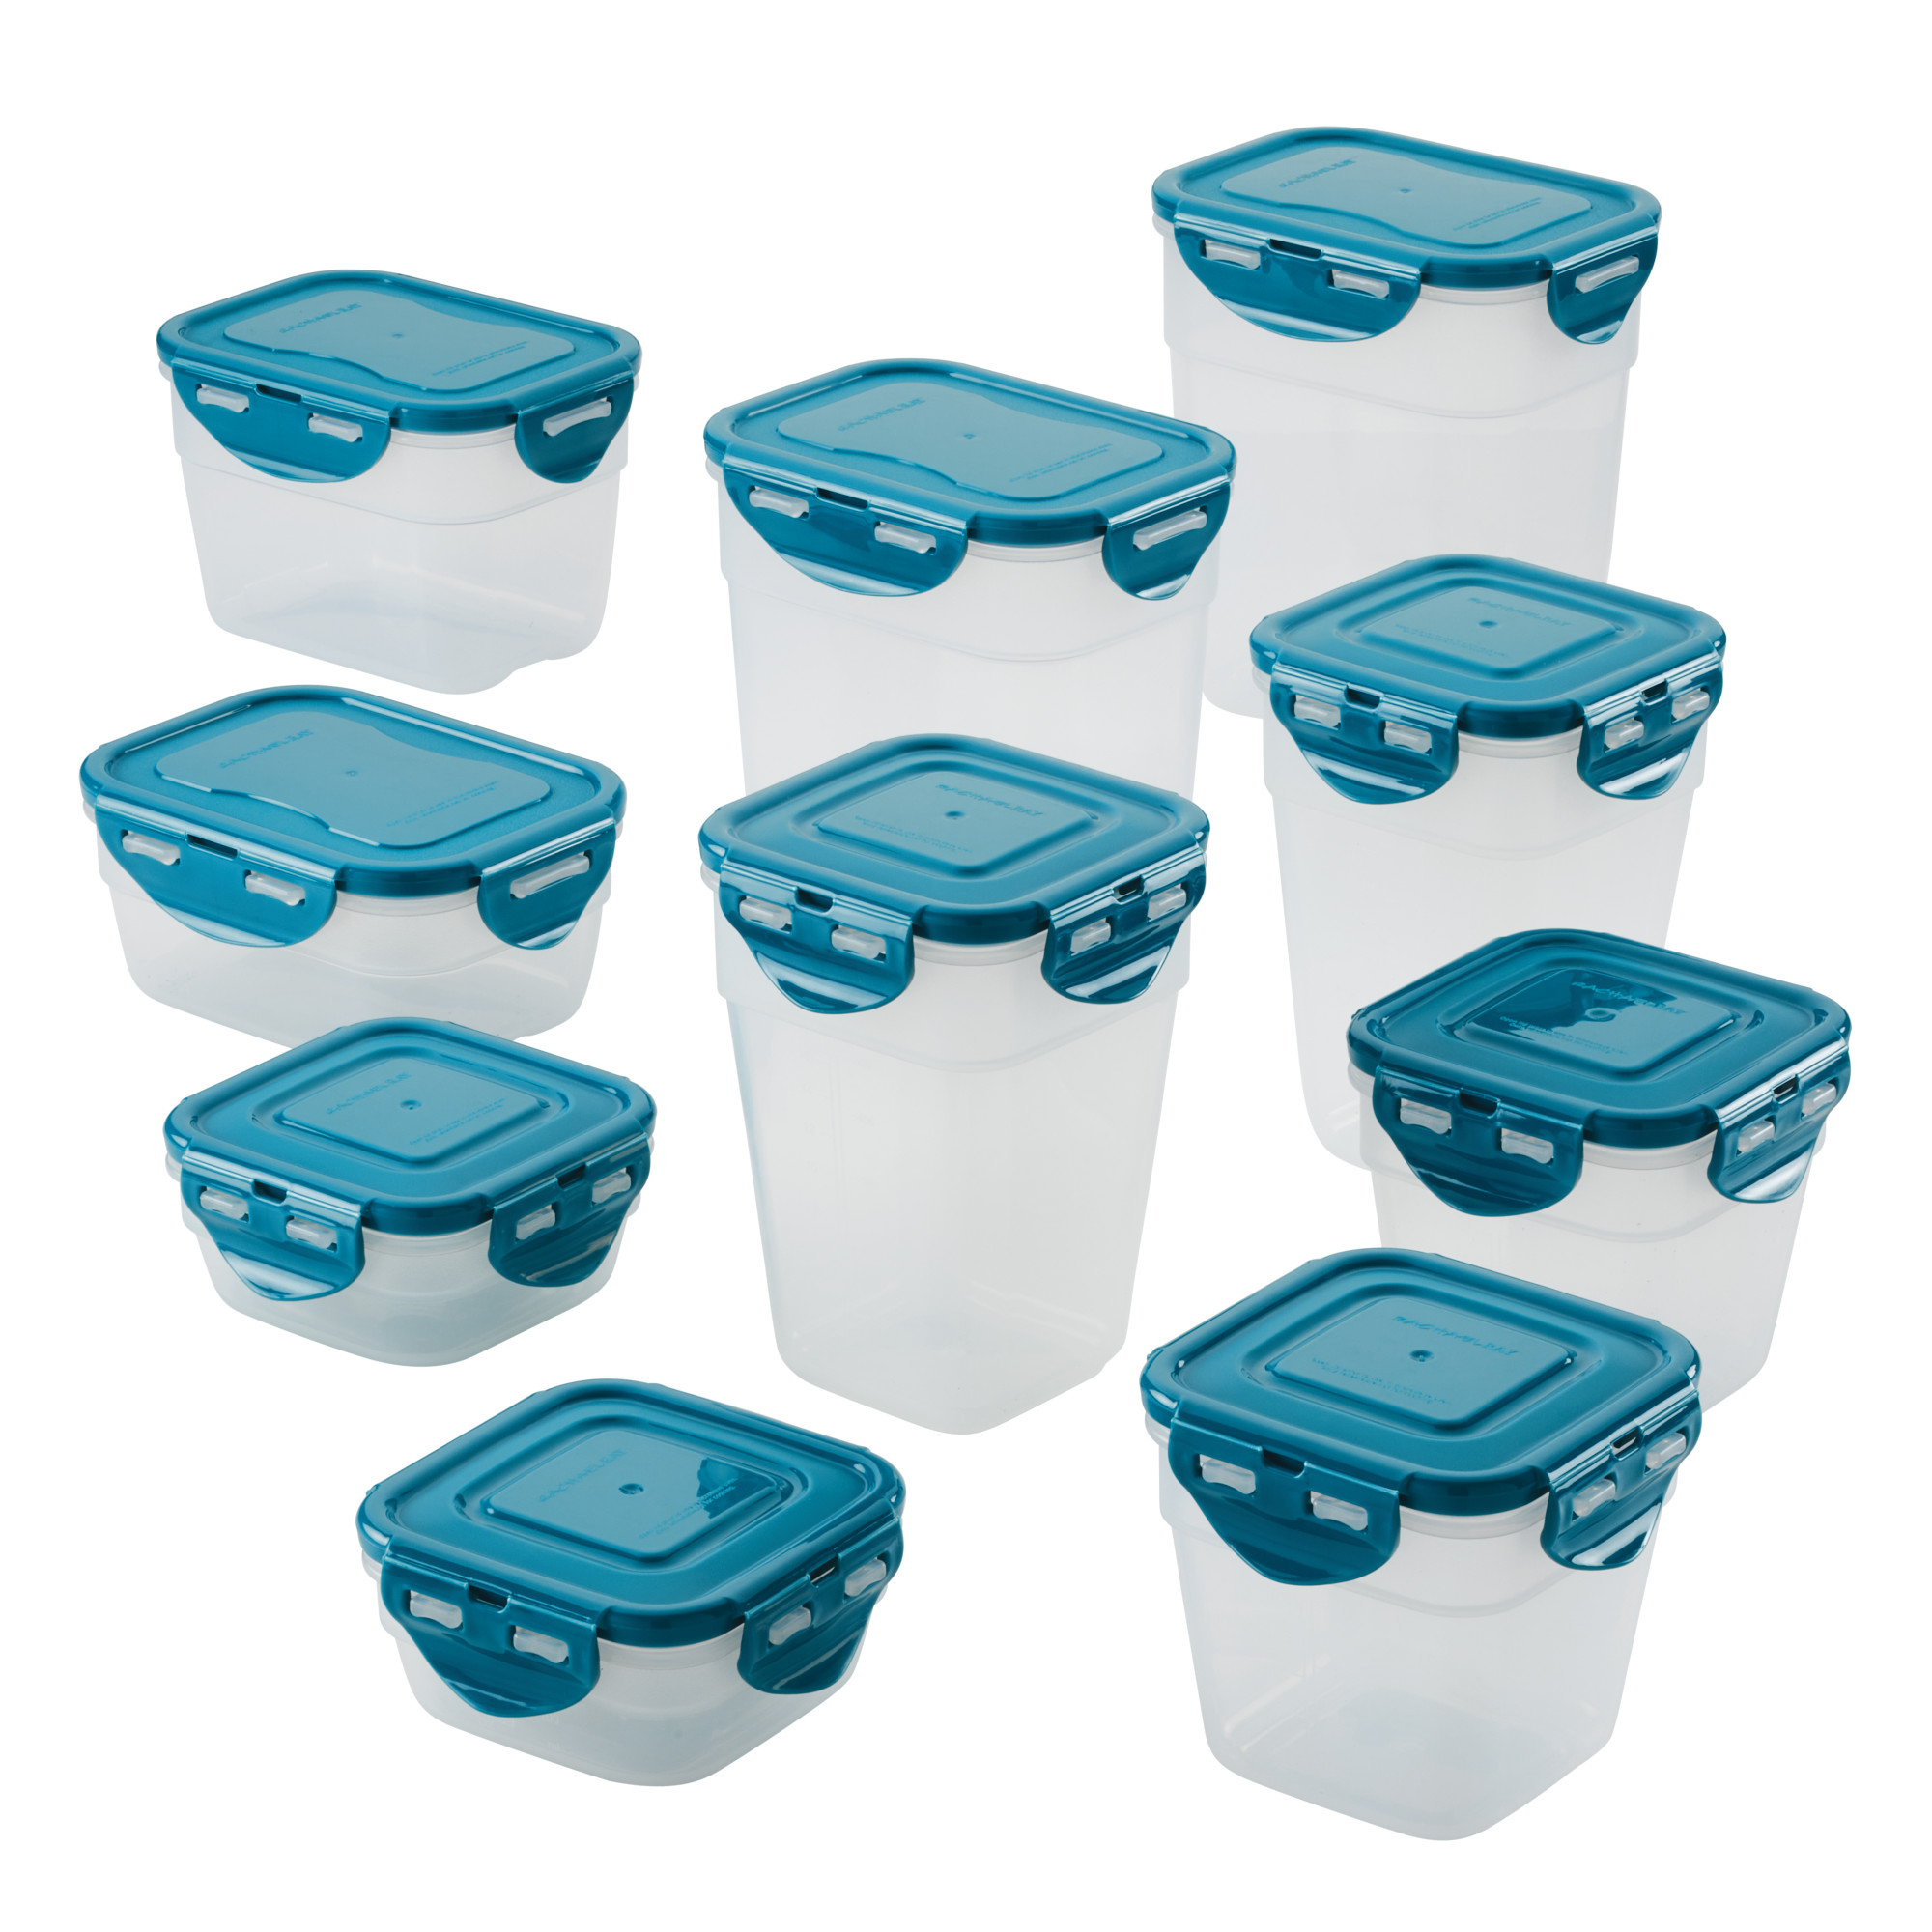 Rachael Ray Leak-Proof Stacking Food Storage Container Set, 20-Piece, Teal Lids - image 1 of 17